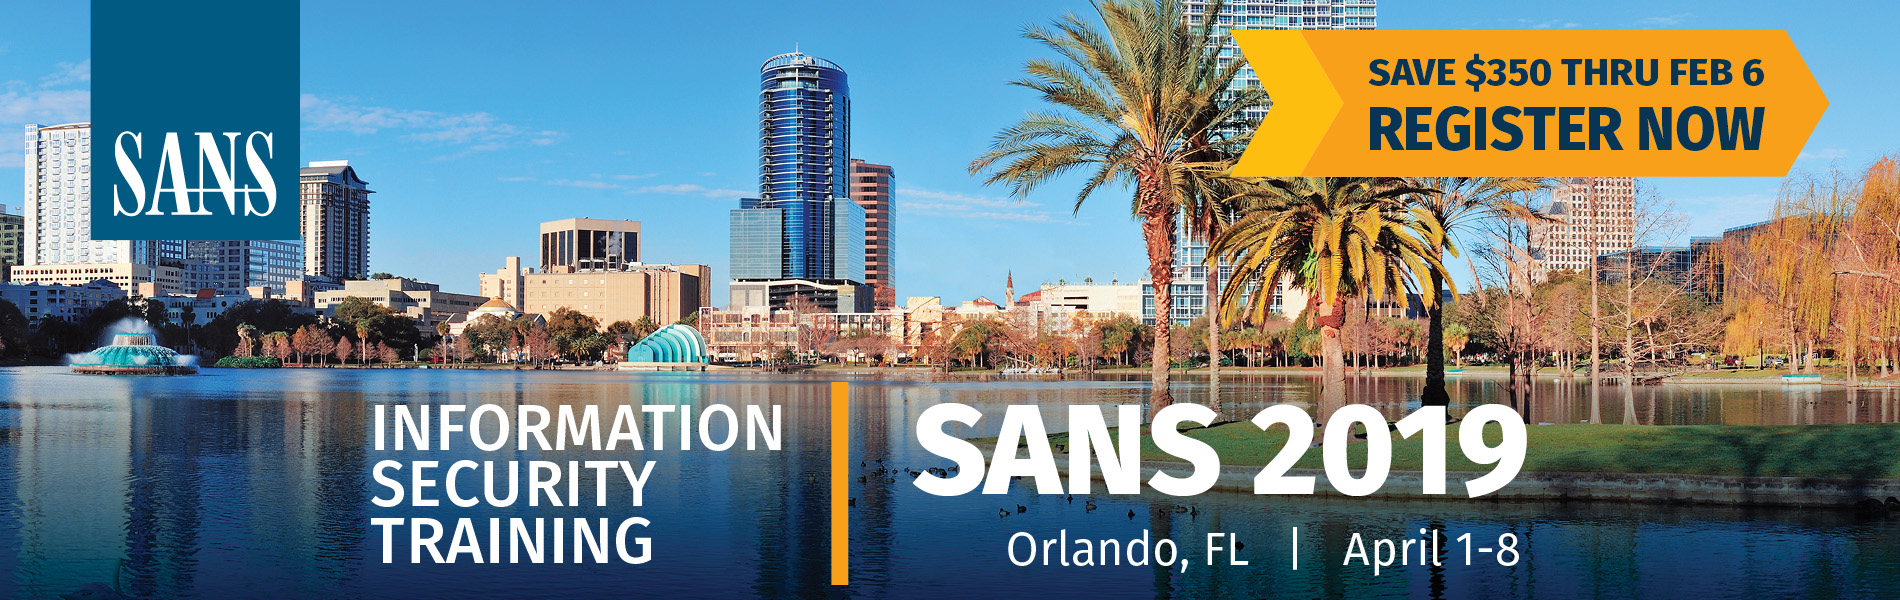 SANS 2019 Orlando Training Event Features 50 Courses to Develop Cyber Security Skills at Every Level